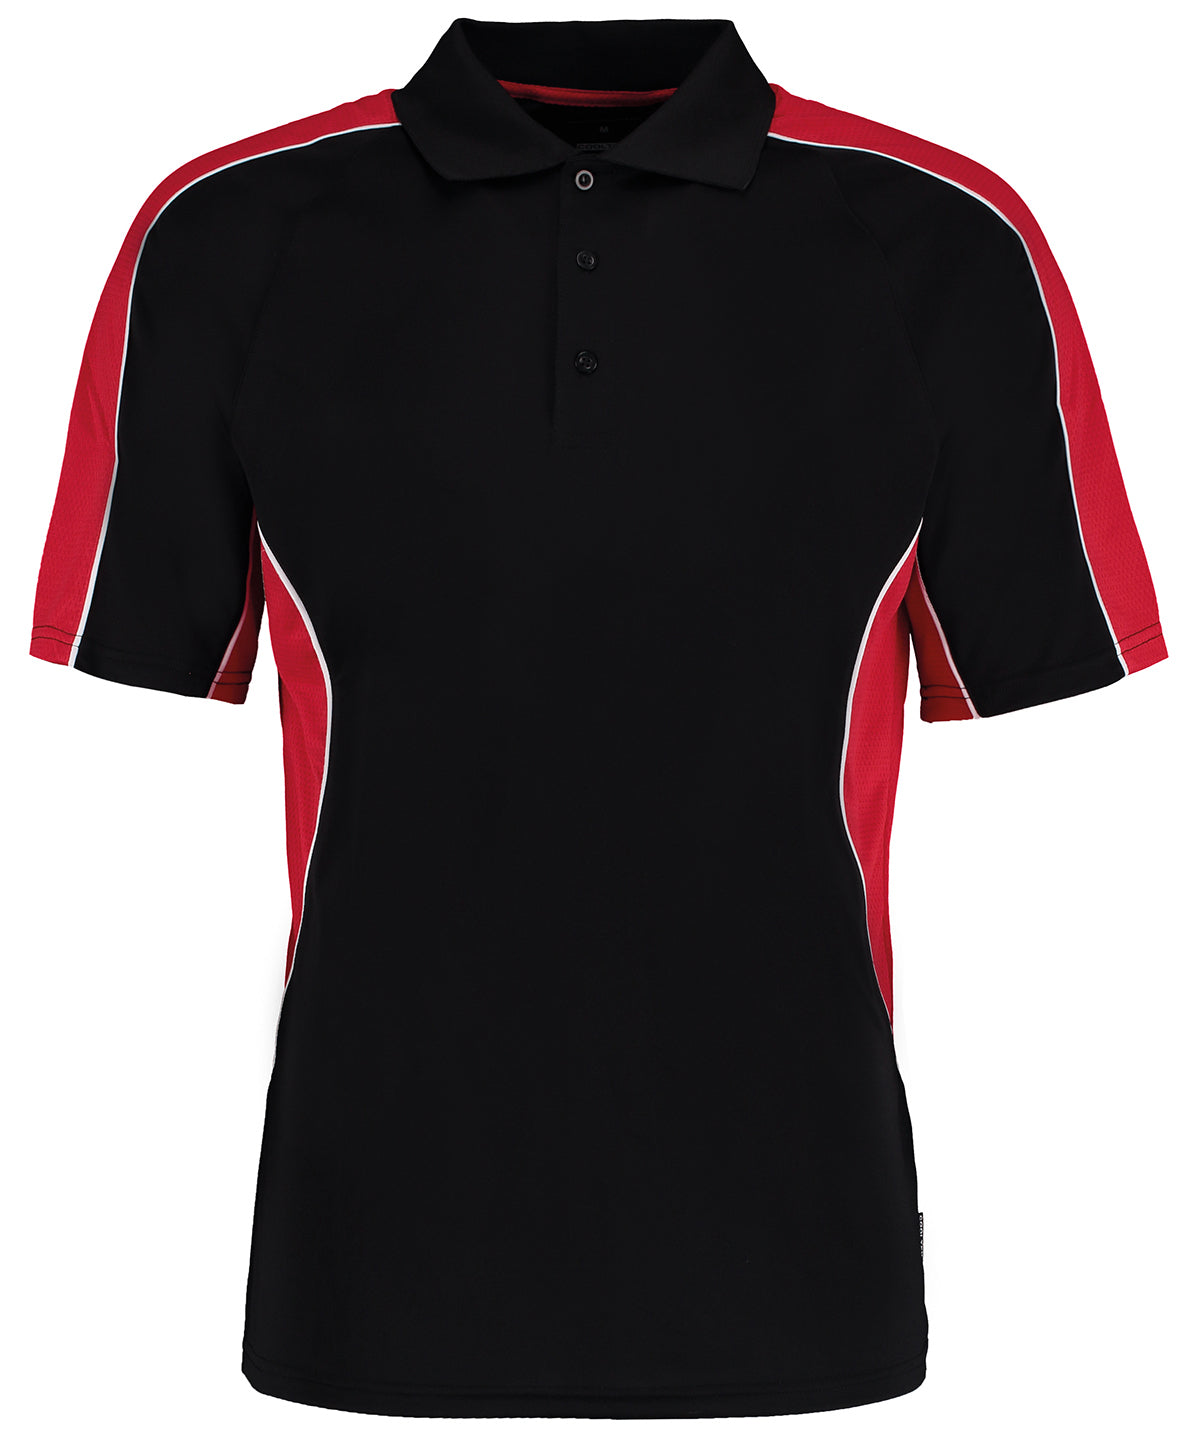 Personalised Polo Shirts - Black GameGear Gamegear® Cooltex® active polo shirt (classic fit)